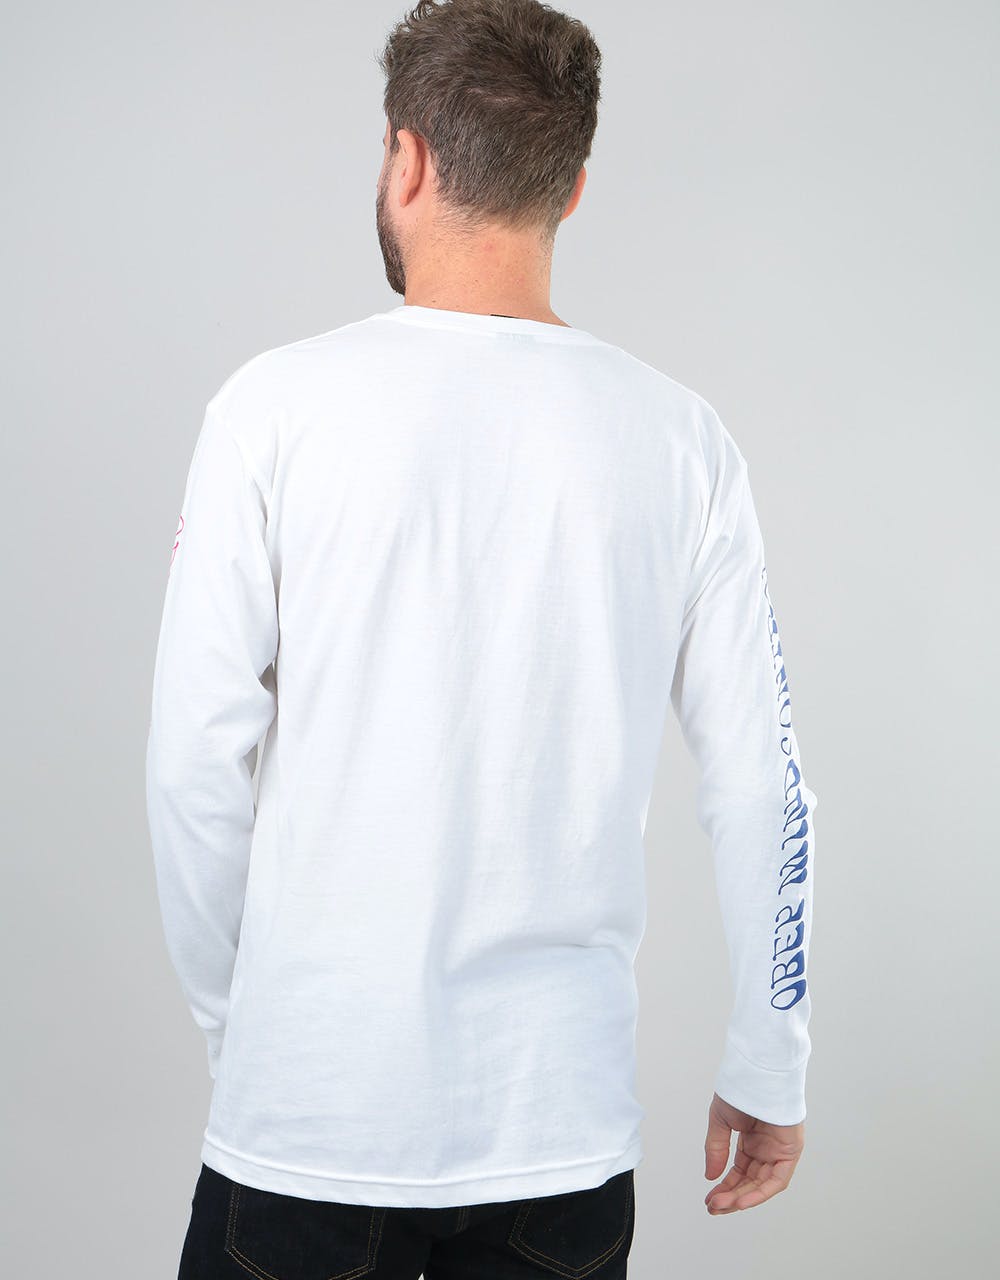 Obey Mindful L/S T-Shirt - White